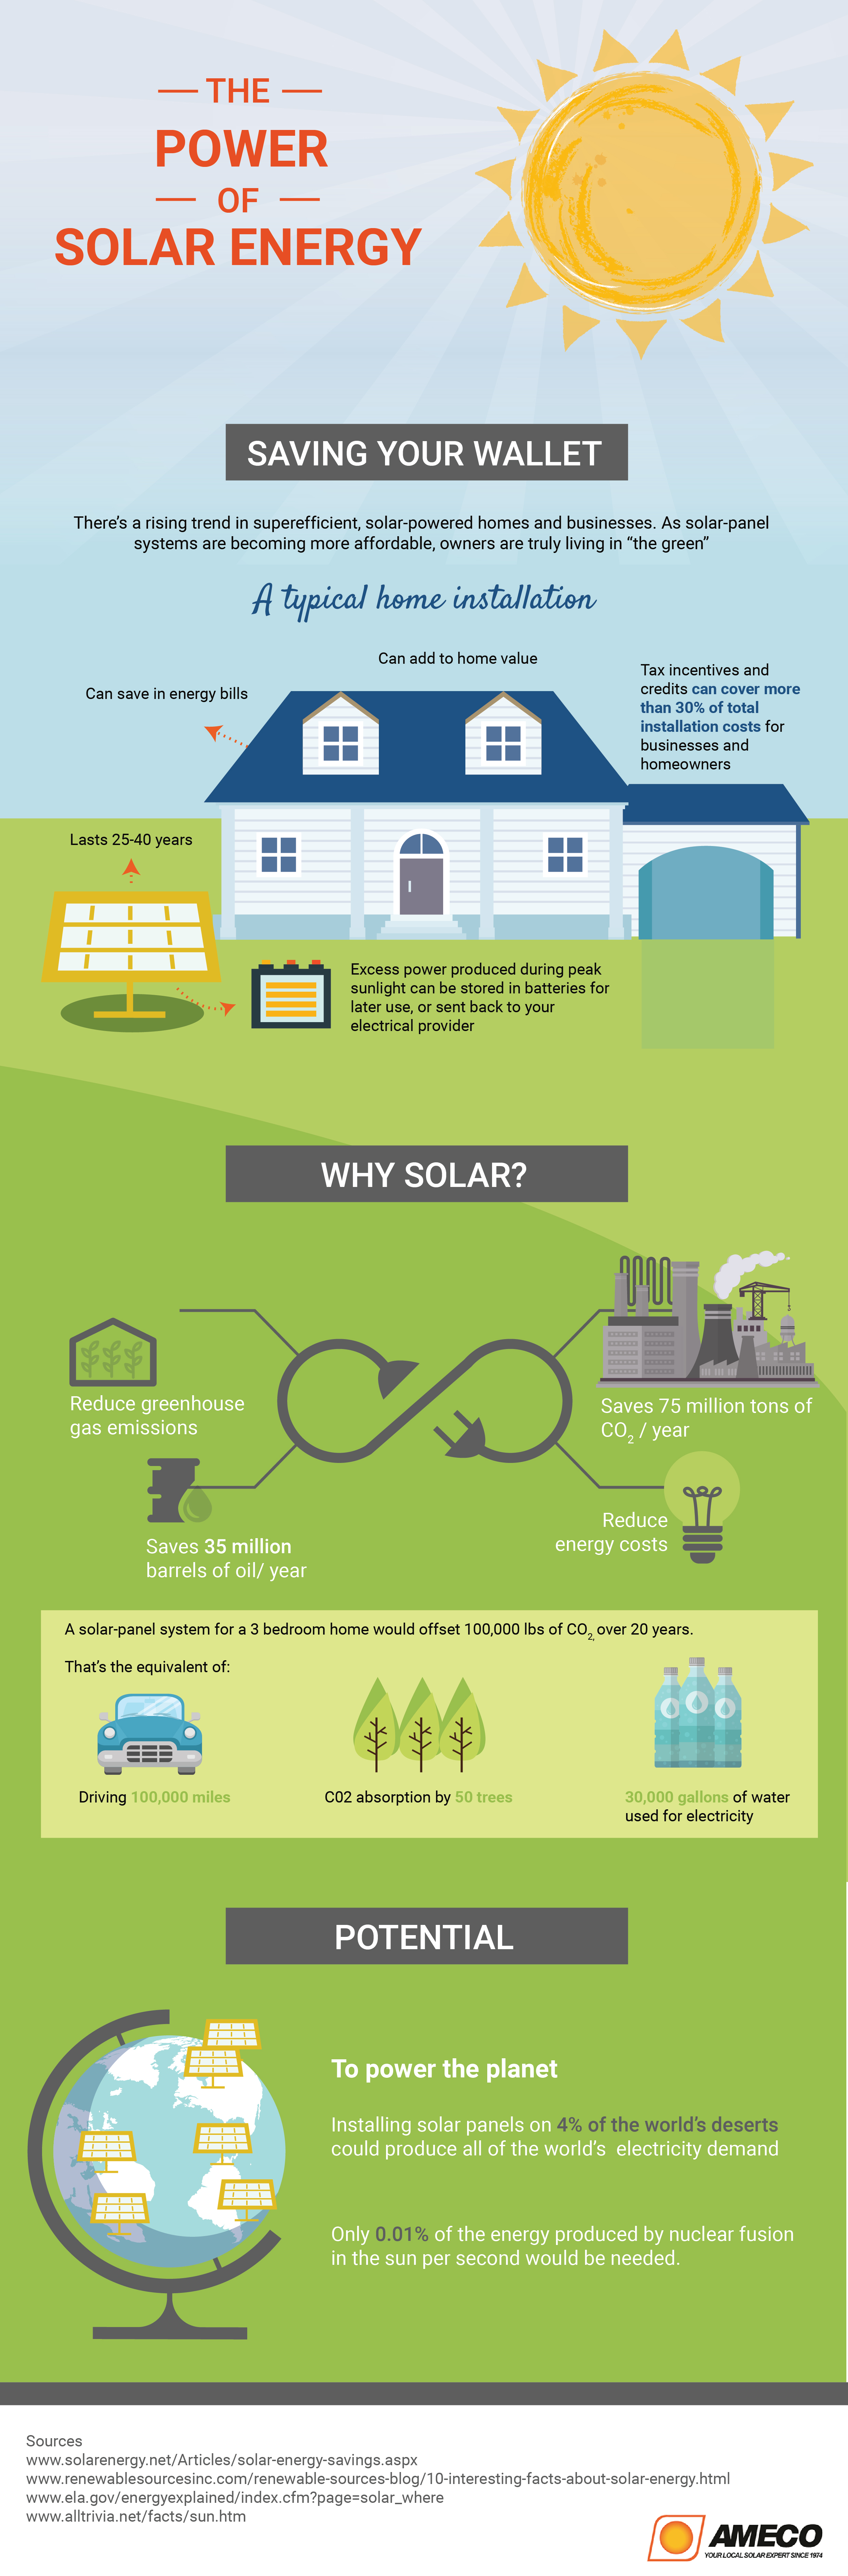 HOW SOLAR ENERGY CAN MAKE YOUR LIFE BETTER